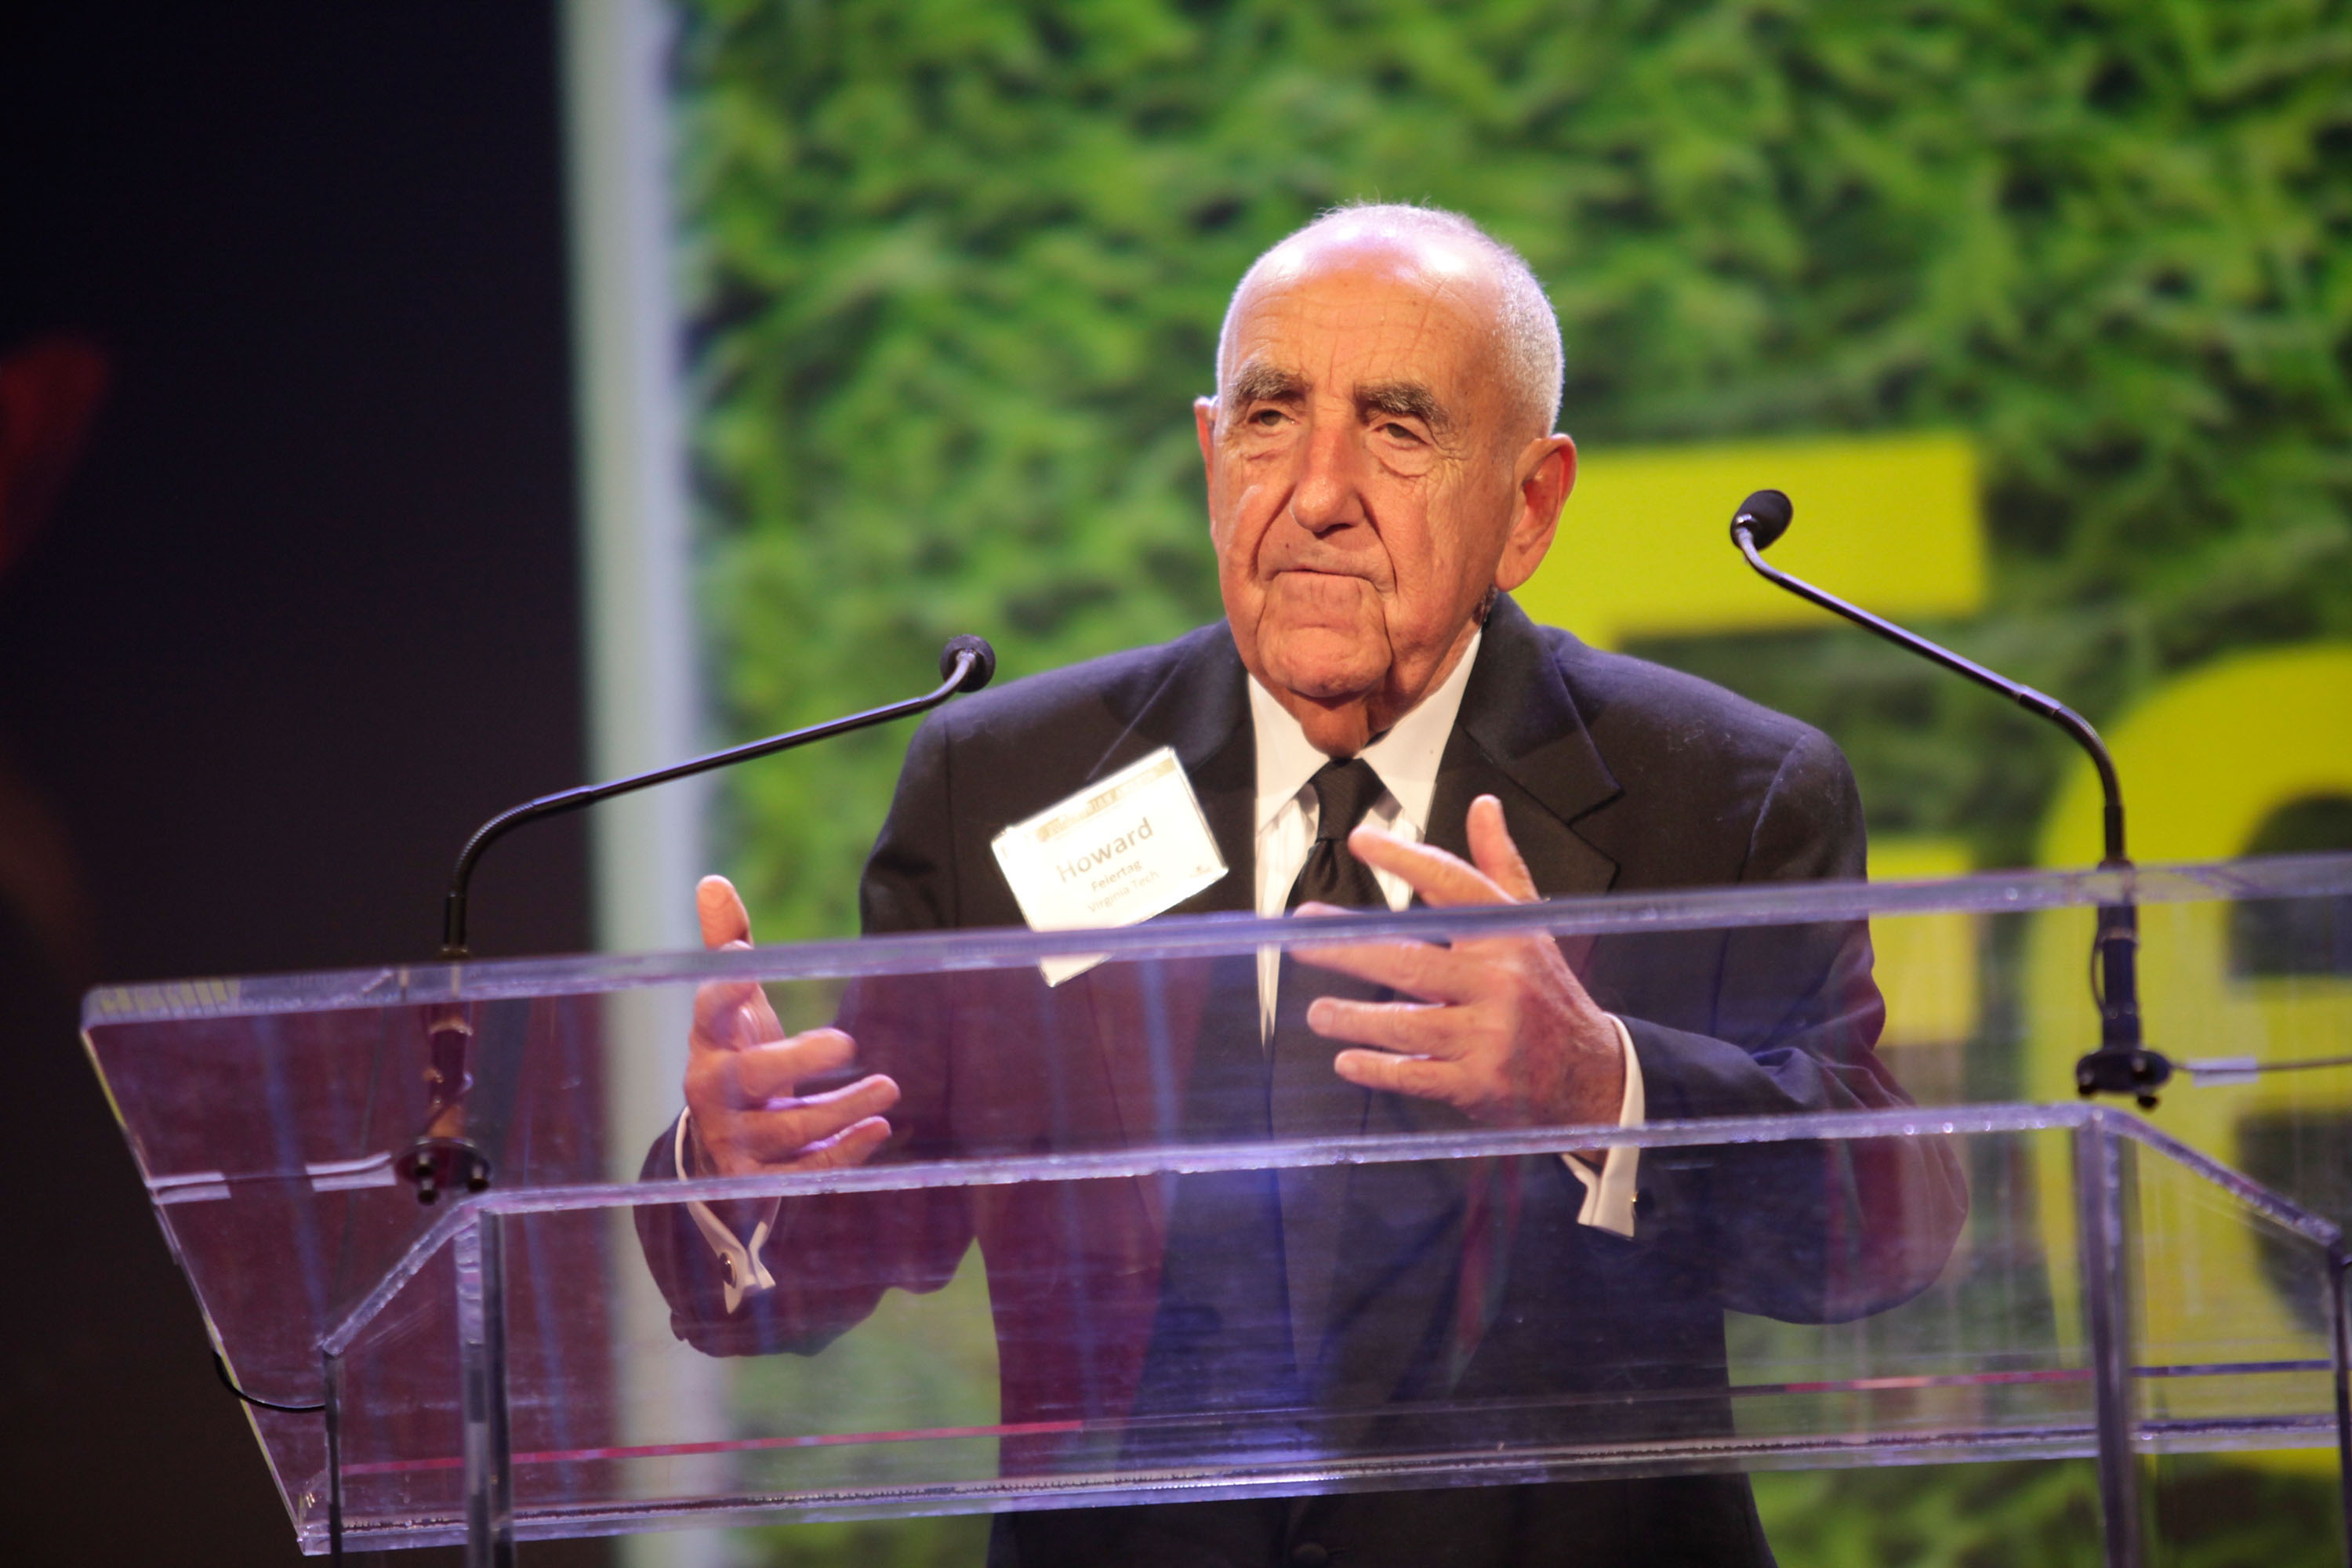 Howard Feiertag addresses the audience at annual gala of the Hospitality Sales and Marketing Association International. Photo credit: Getty Images for HSMAI